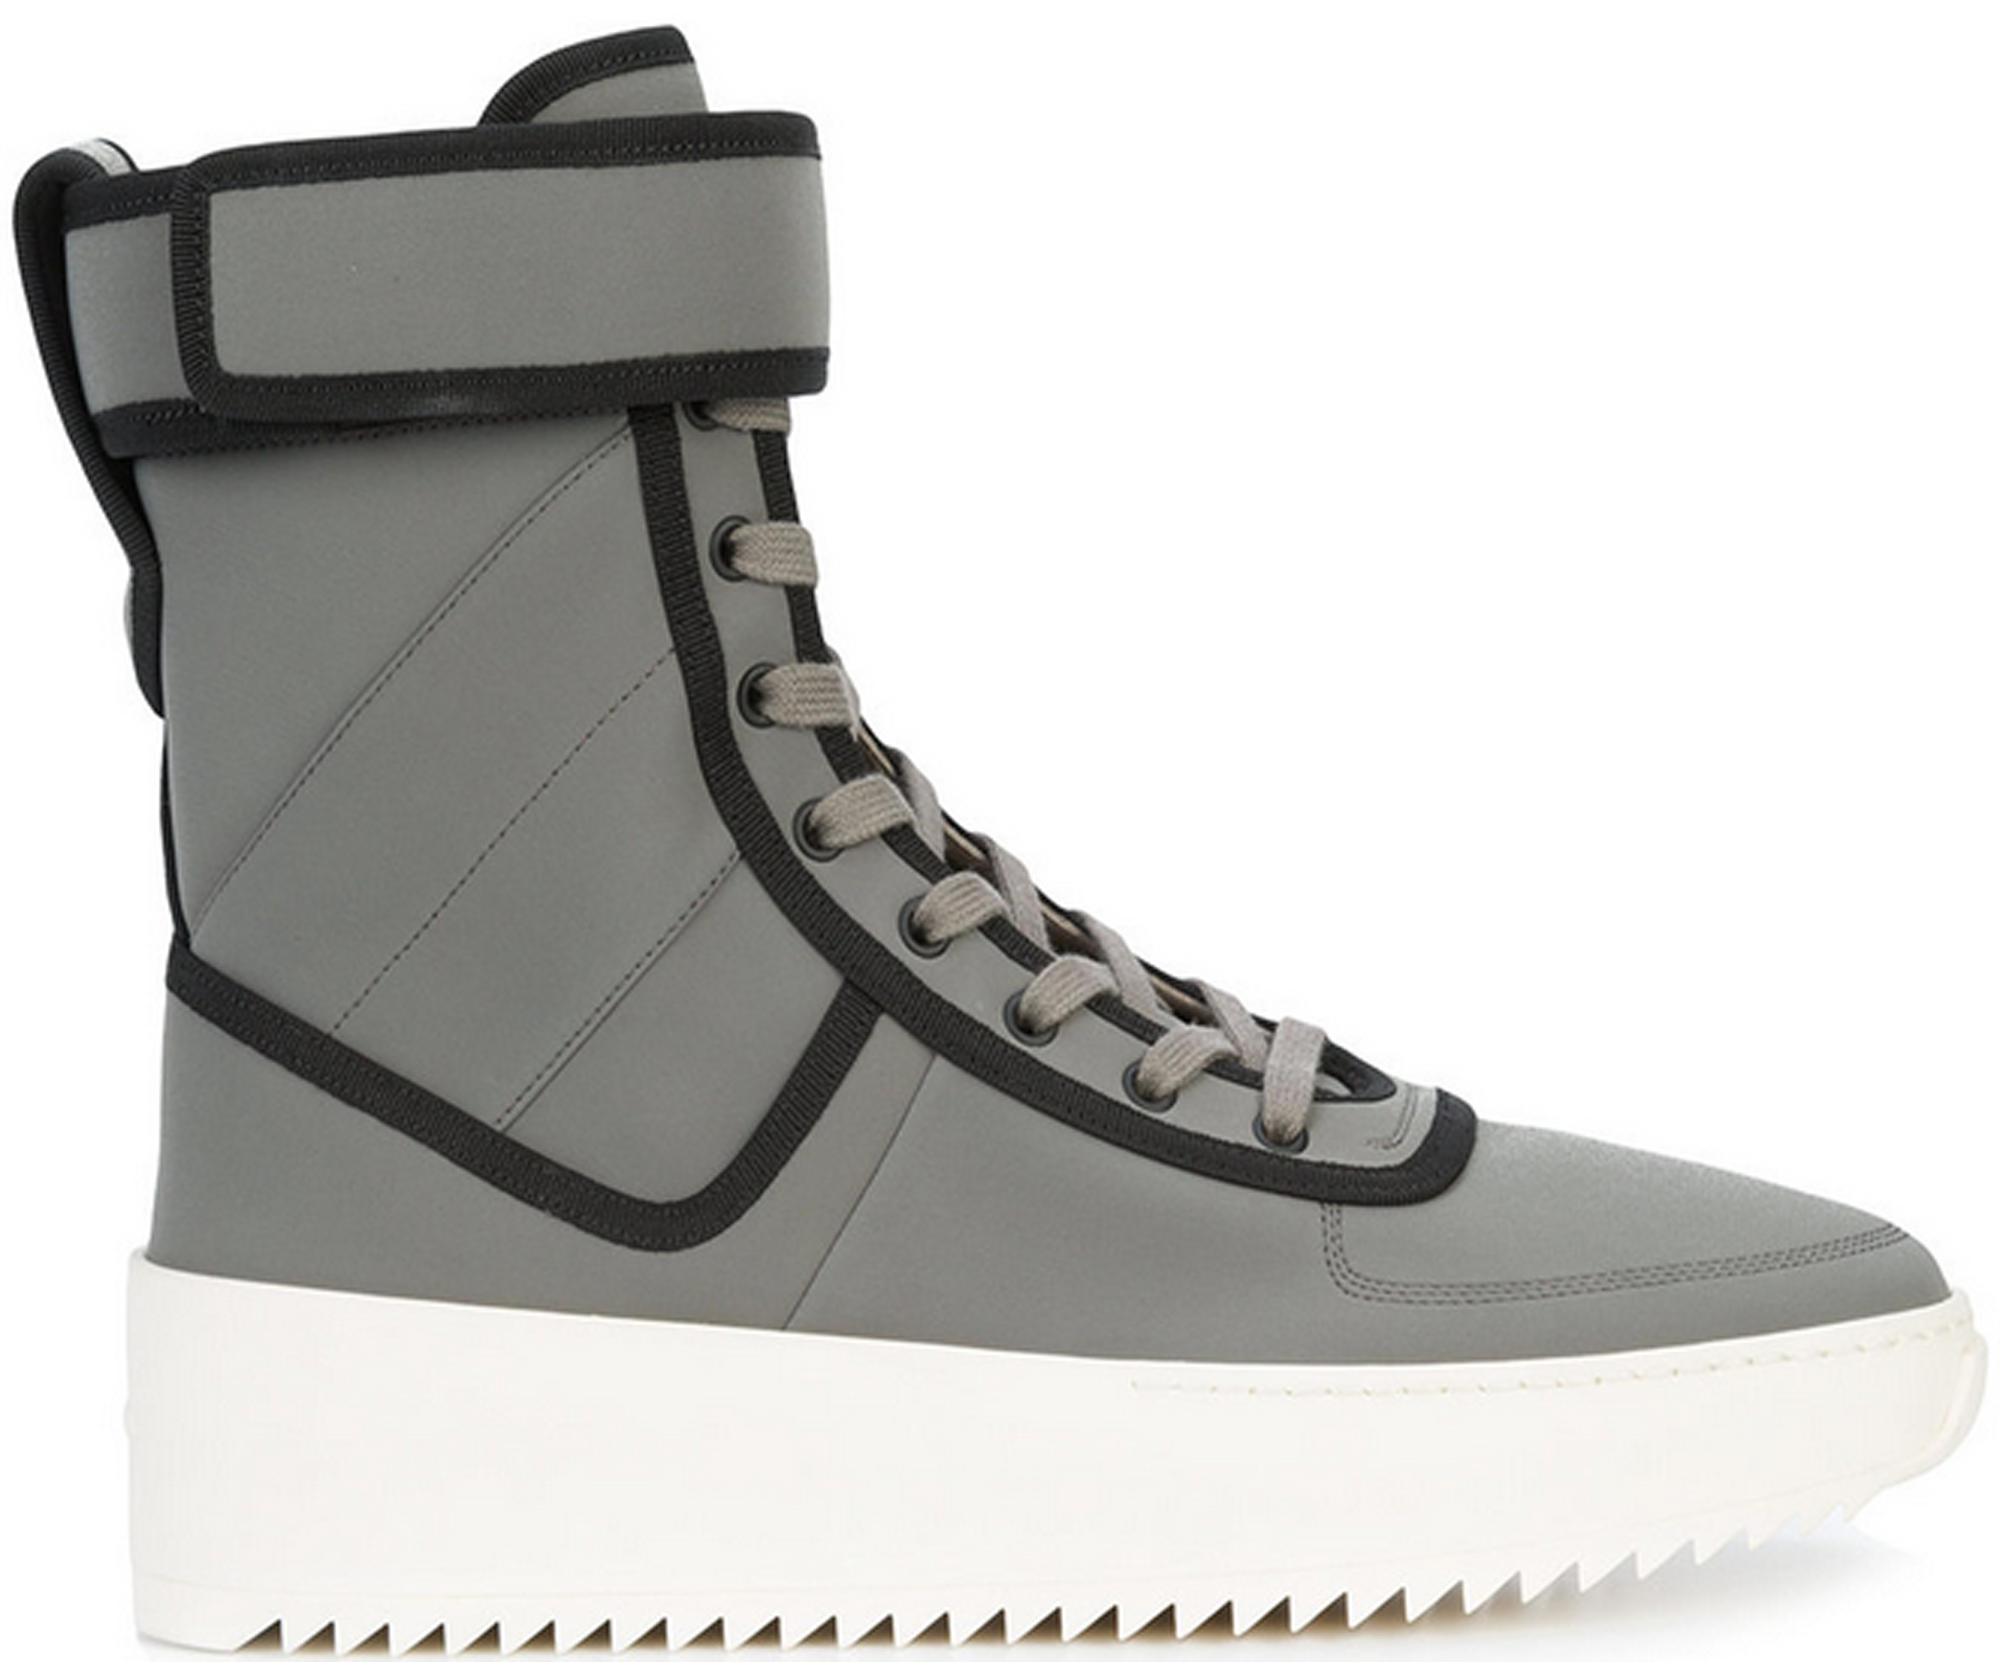 Buy Nike X Fear Of God Air Shoot Around Sneakers - Black At 15% Off |  Editorialist